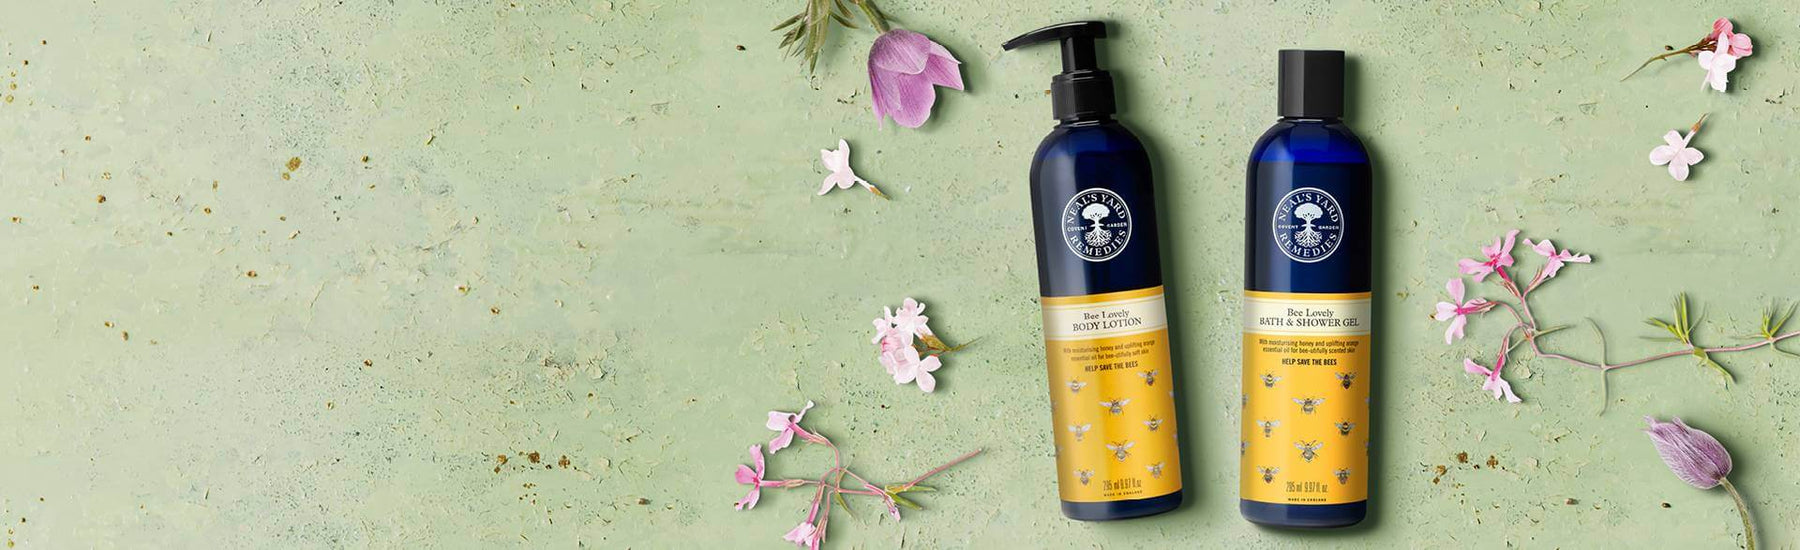 Picture of two Bee Lovely body care products by Neal's Yard Remedies